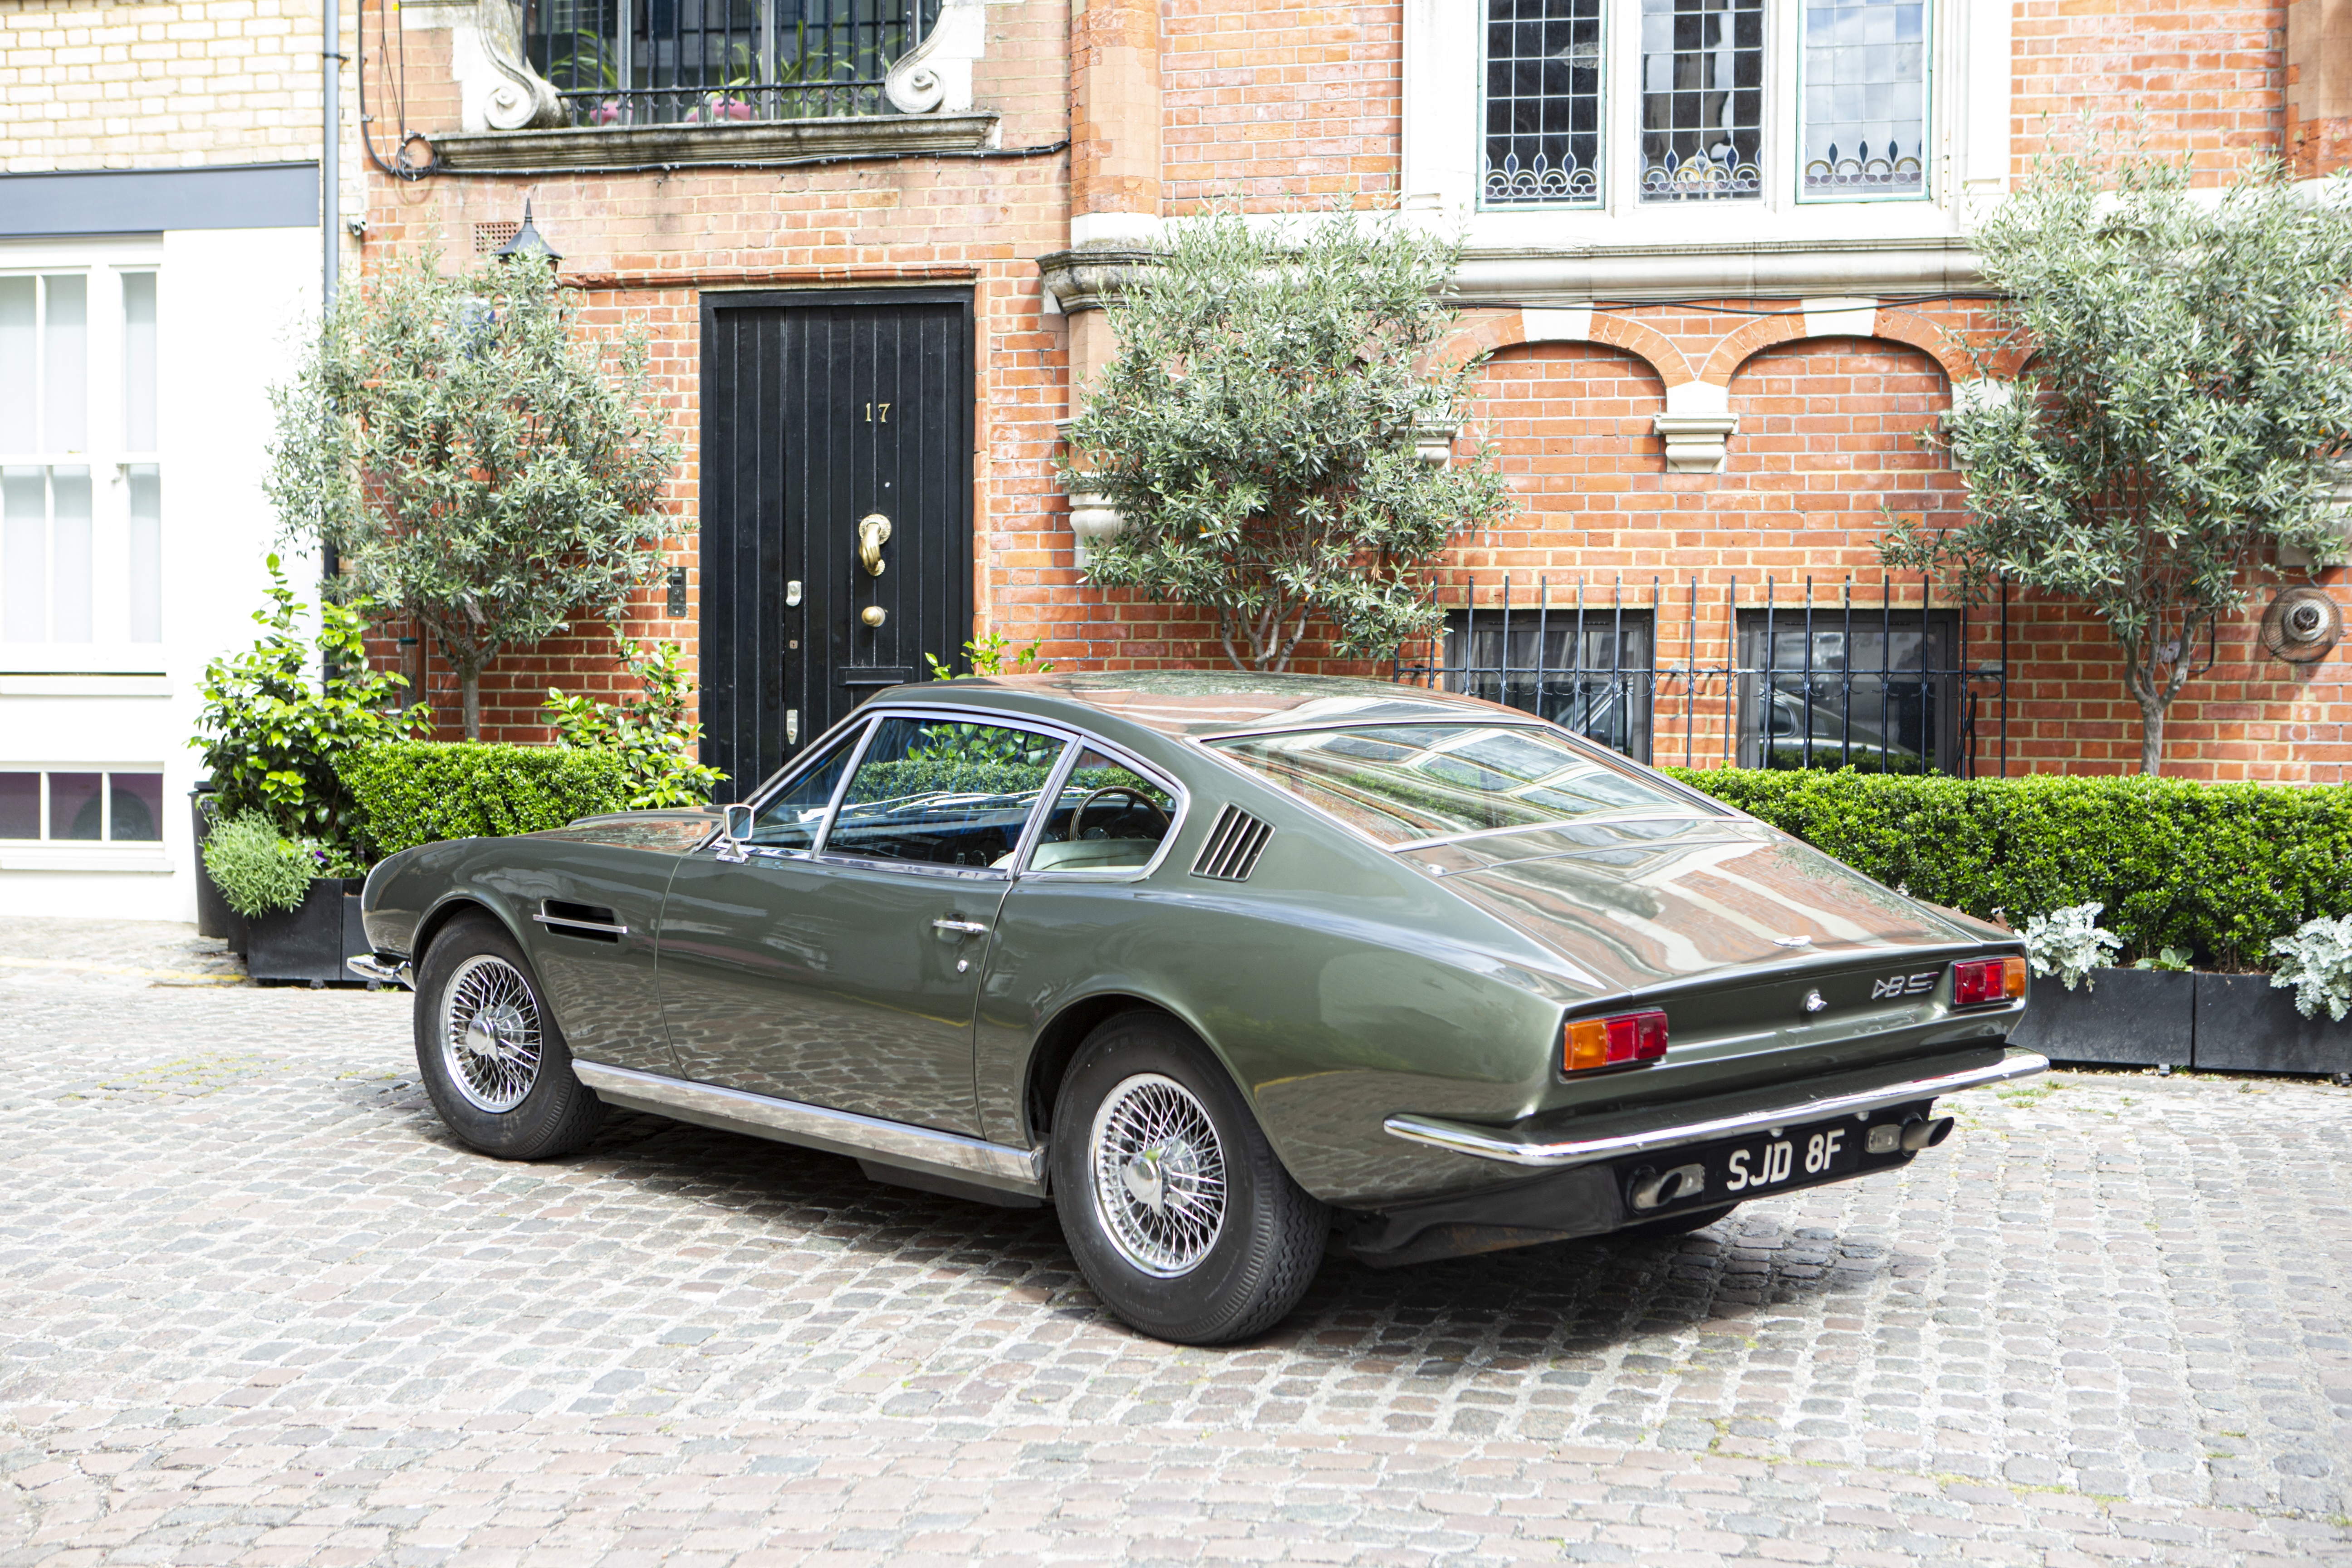 1968 Aston Martin DBS Chassis no. 400/5040/R - Image 34 of 48